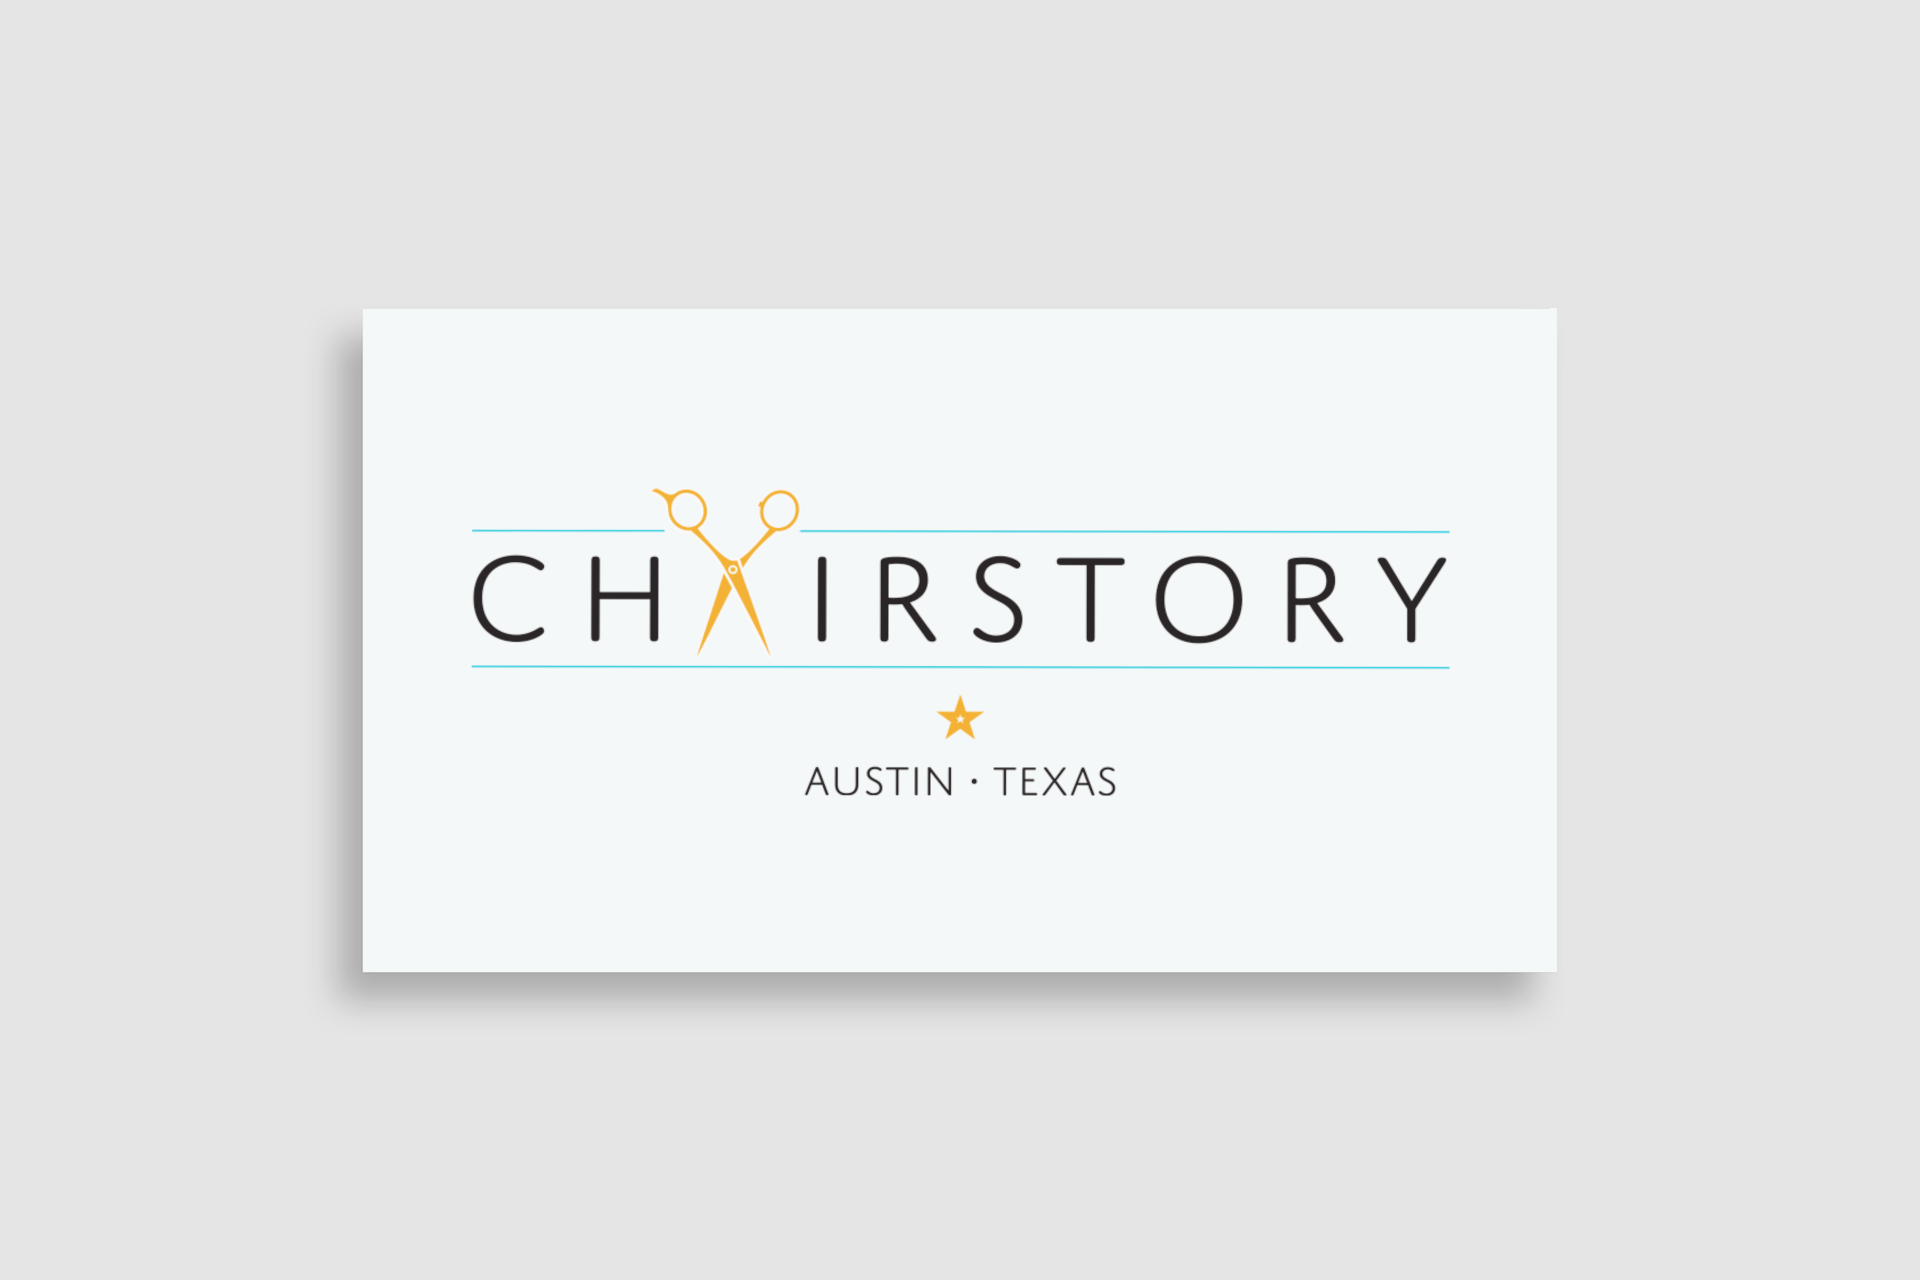 2-Chairstory logo.png